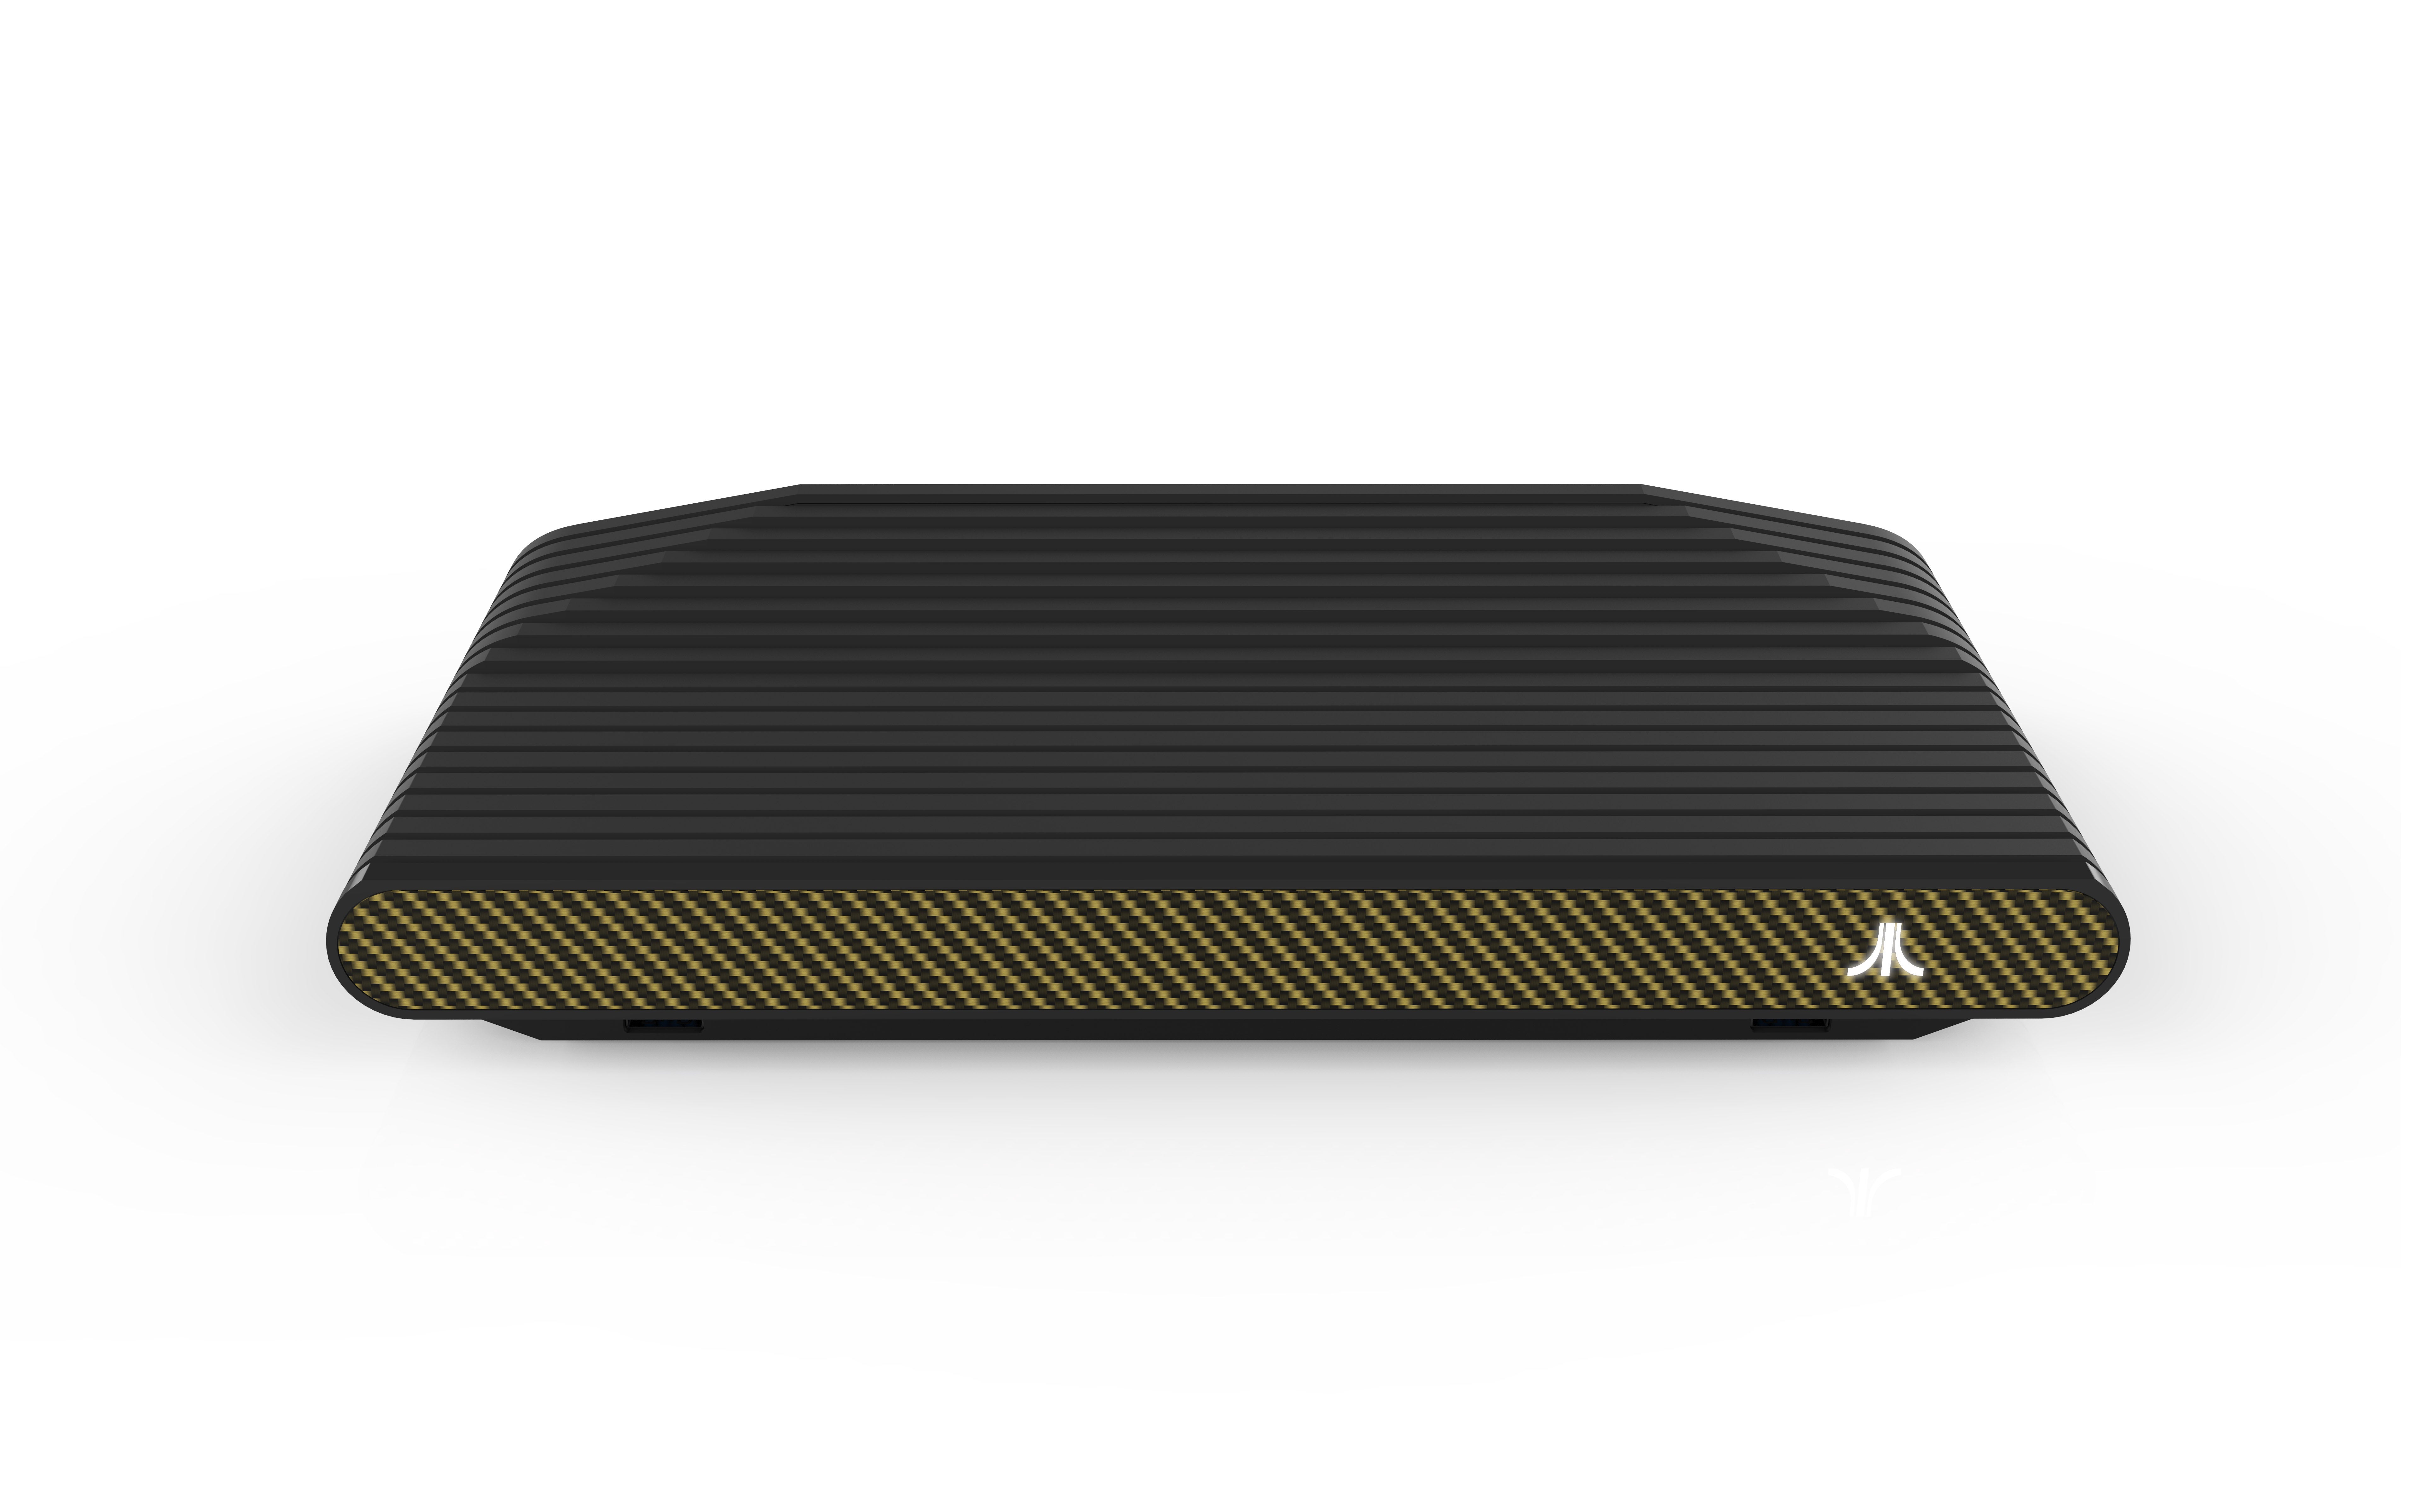 Image for Atari VCS goes on pre-sale in the US starting at $250